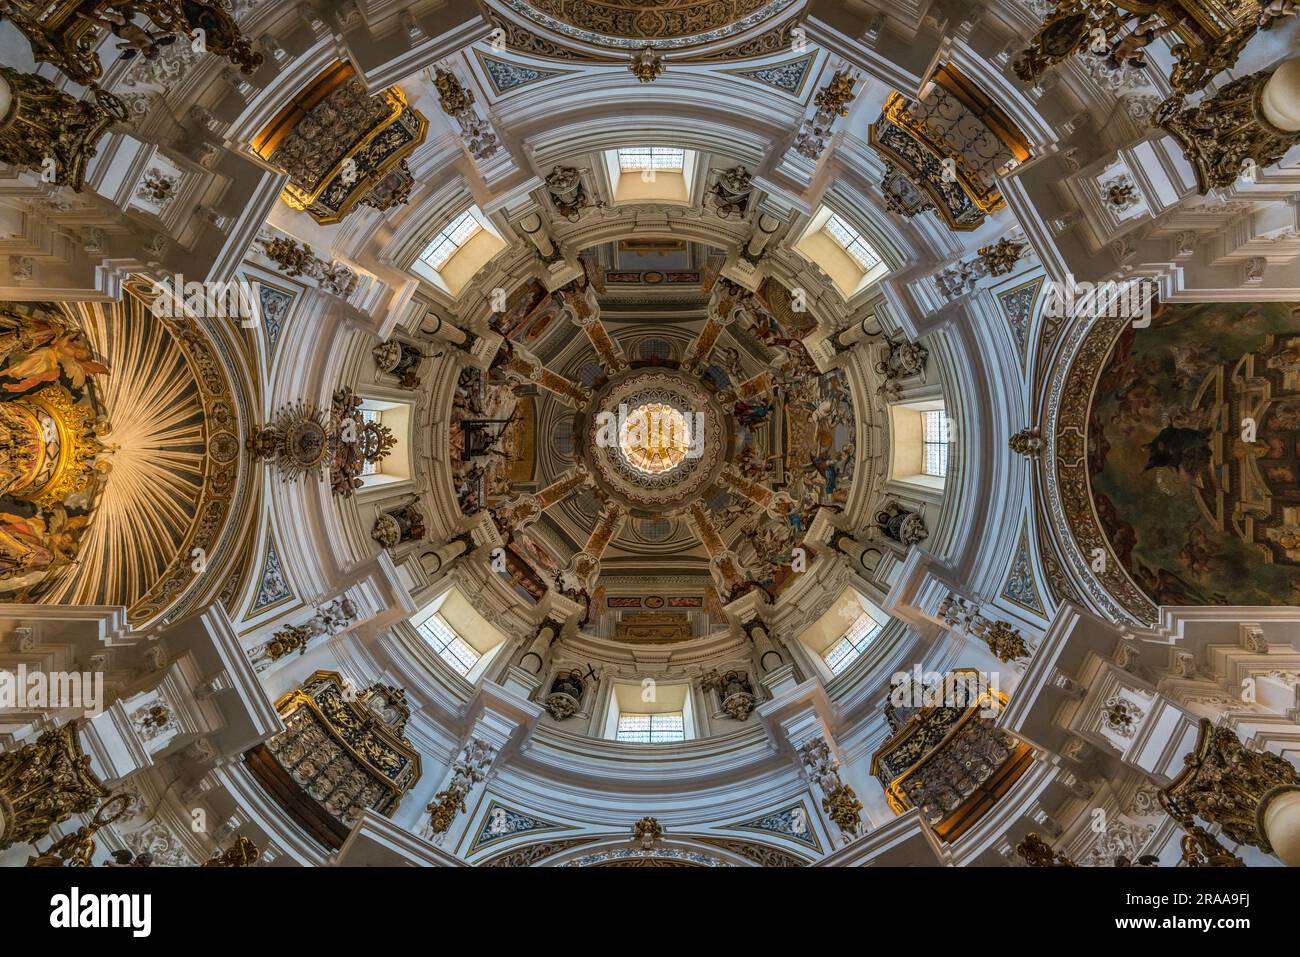 Seville, Spain - June 16, 2023 : Interior wide angle view of Dome and ceilling of baroque style Church of San Luis de los Franceses. Stock Photo